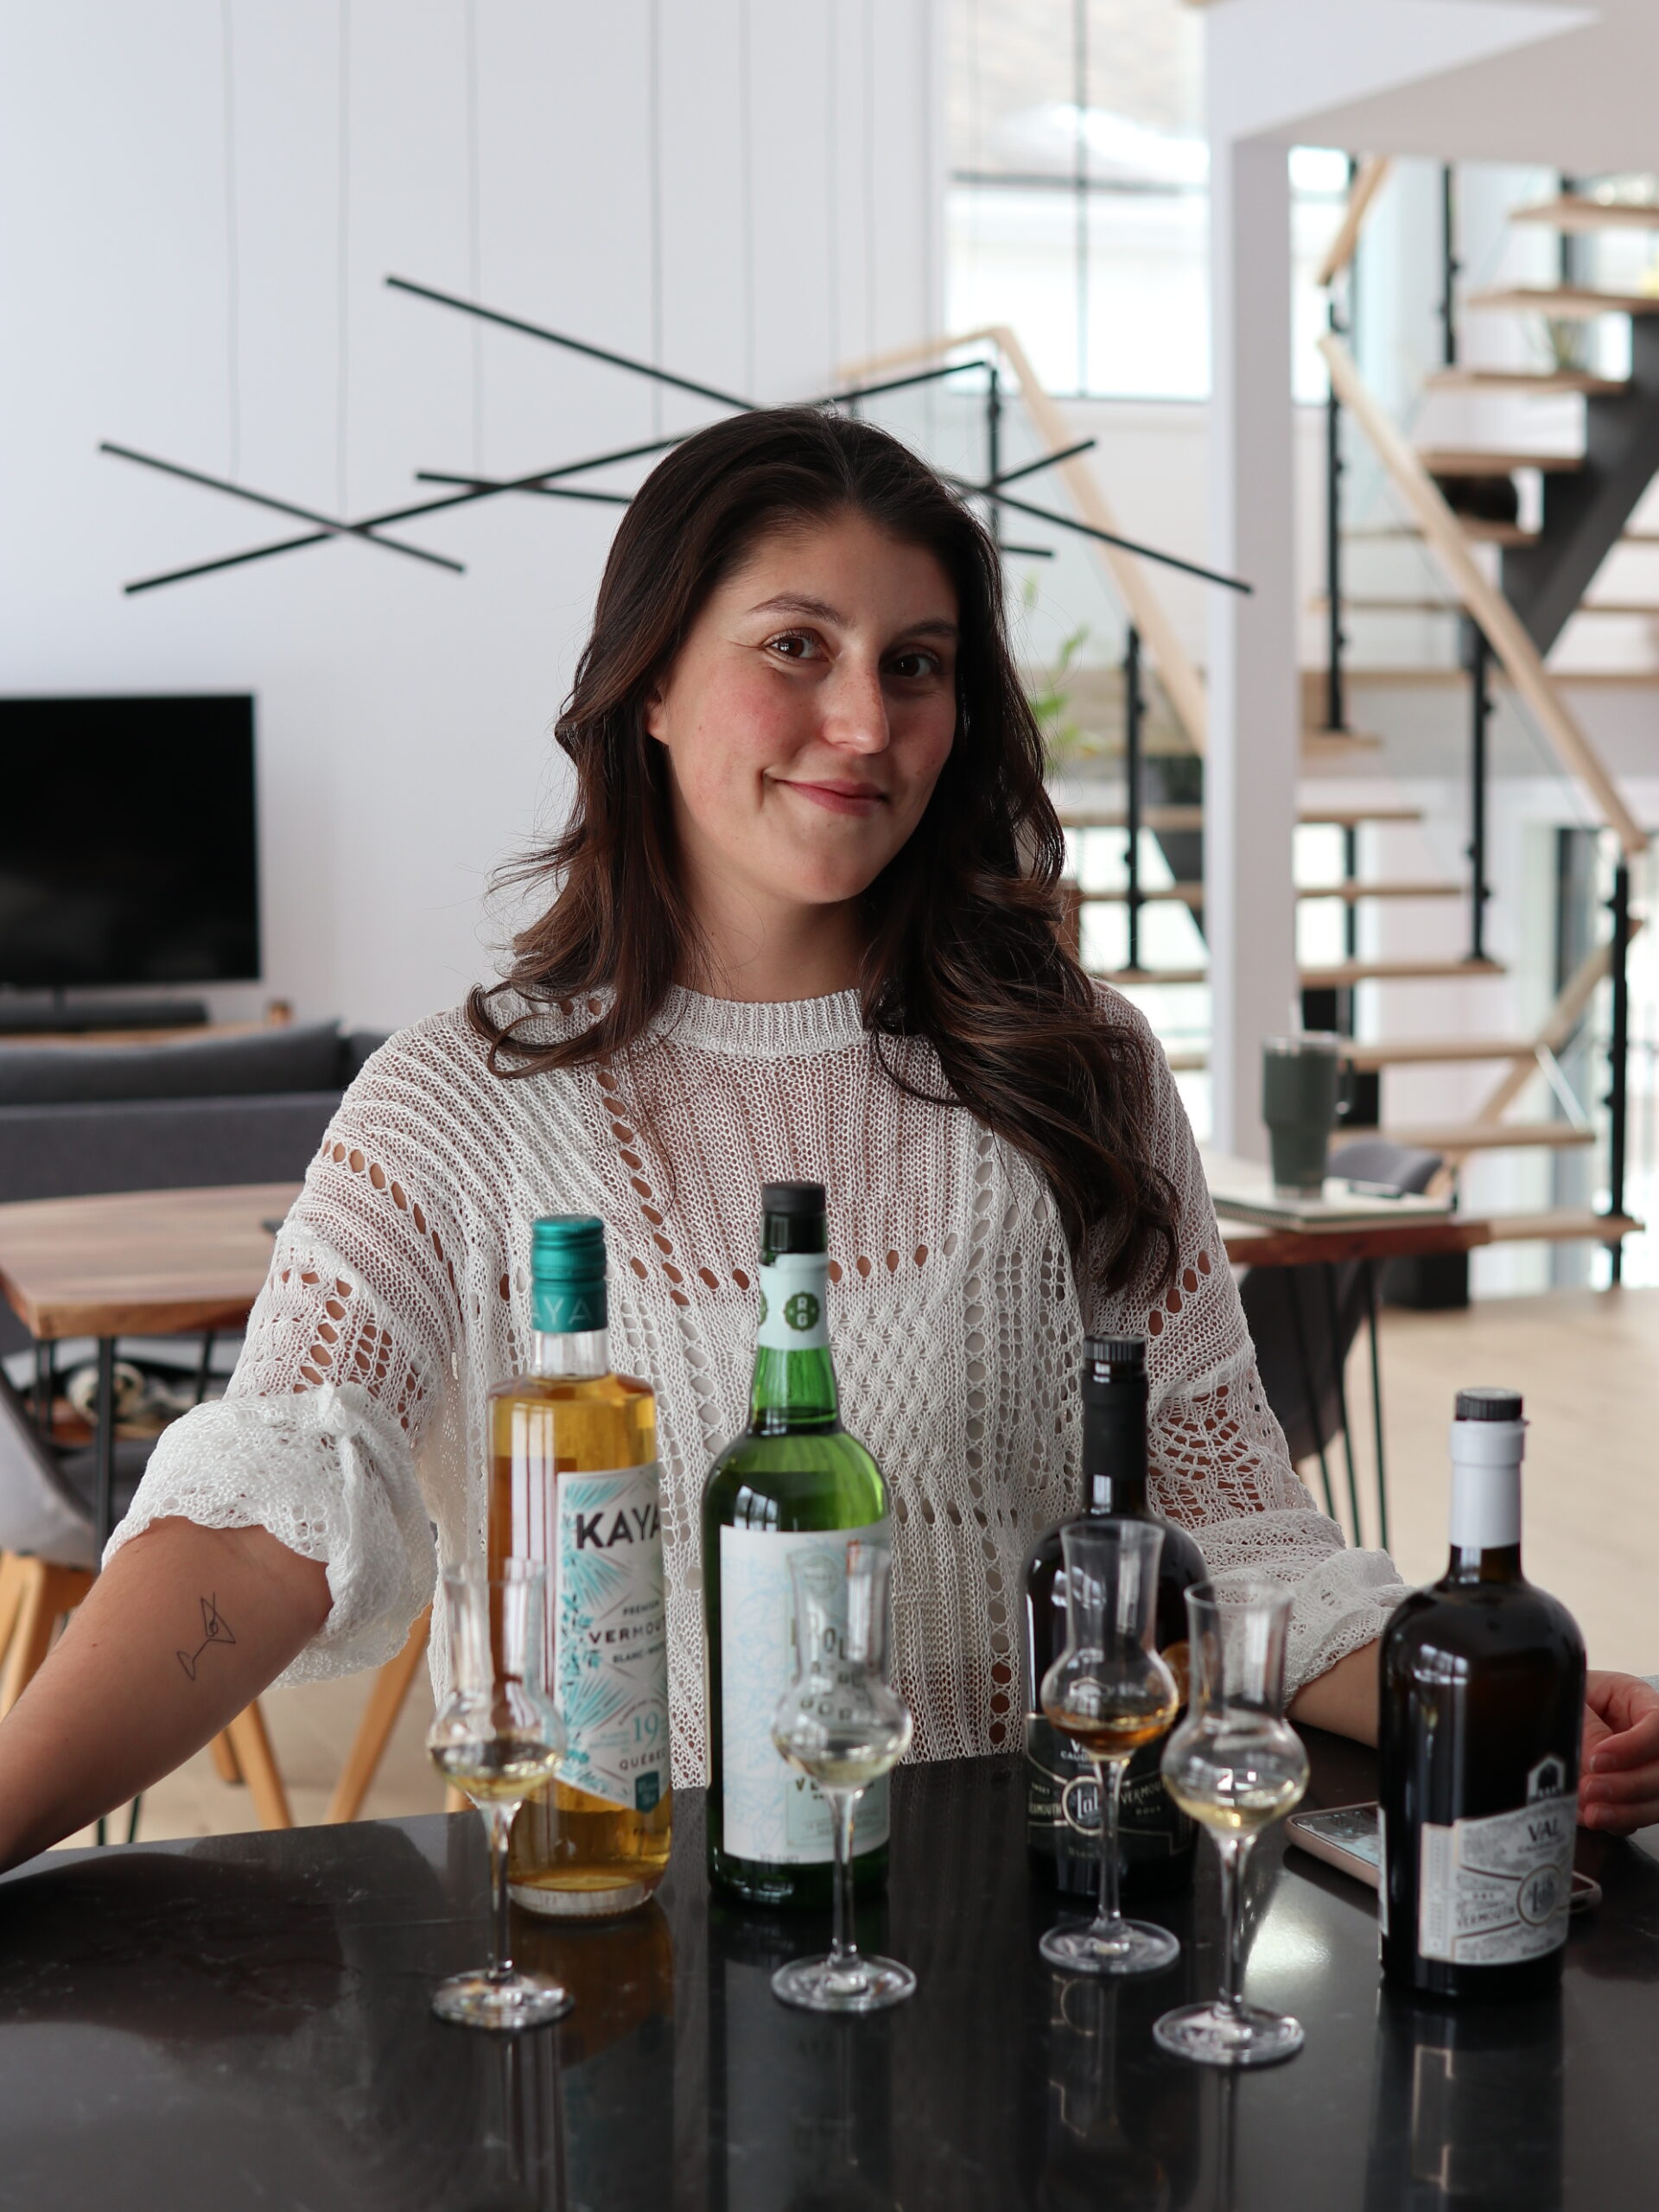 All you need to know about Quebec white vermouths